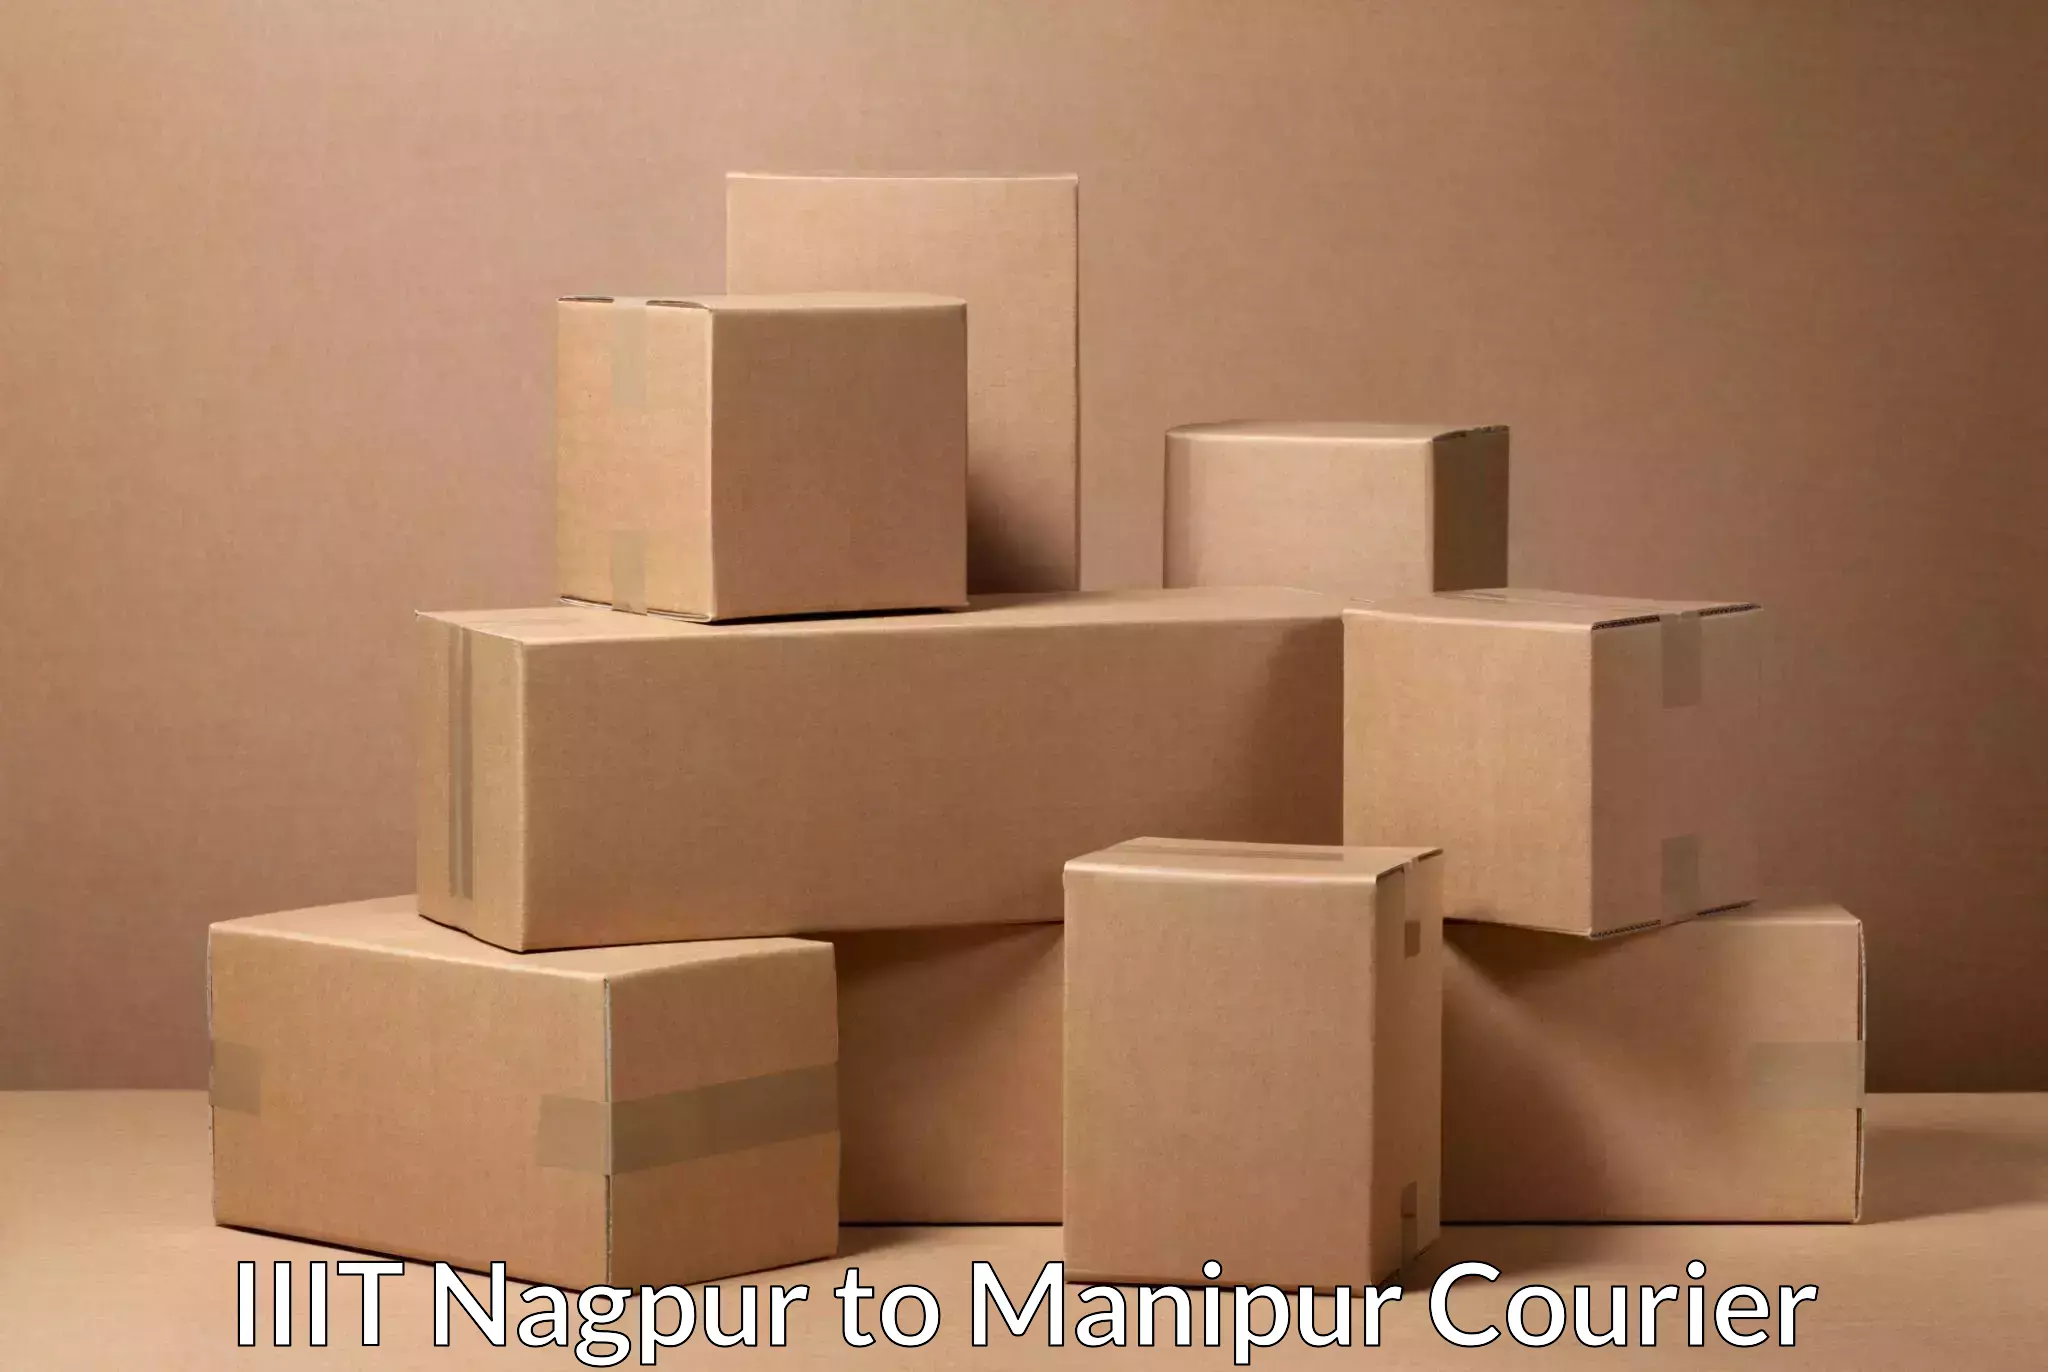 Nationwide shipping coverage IIIT Nagpur to Manipur